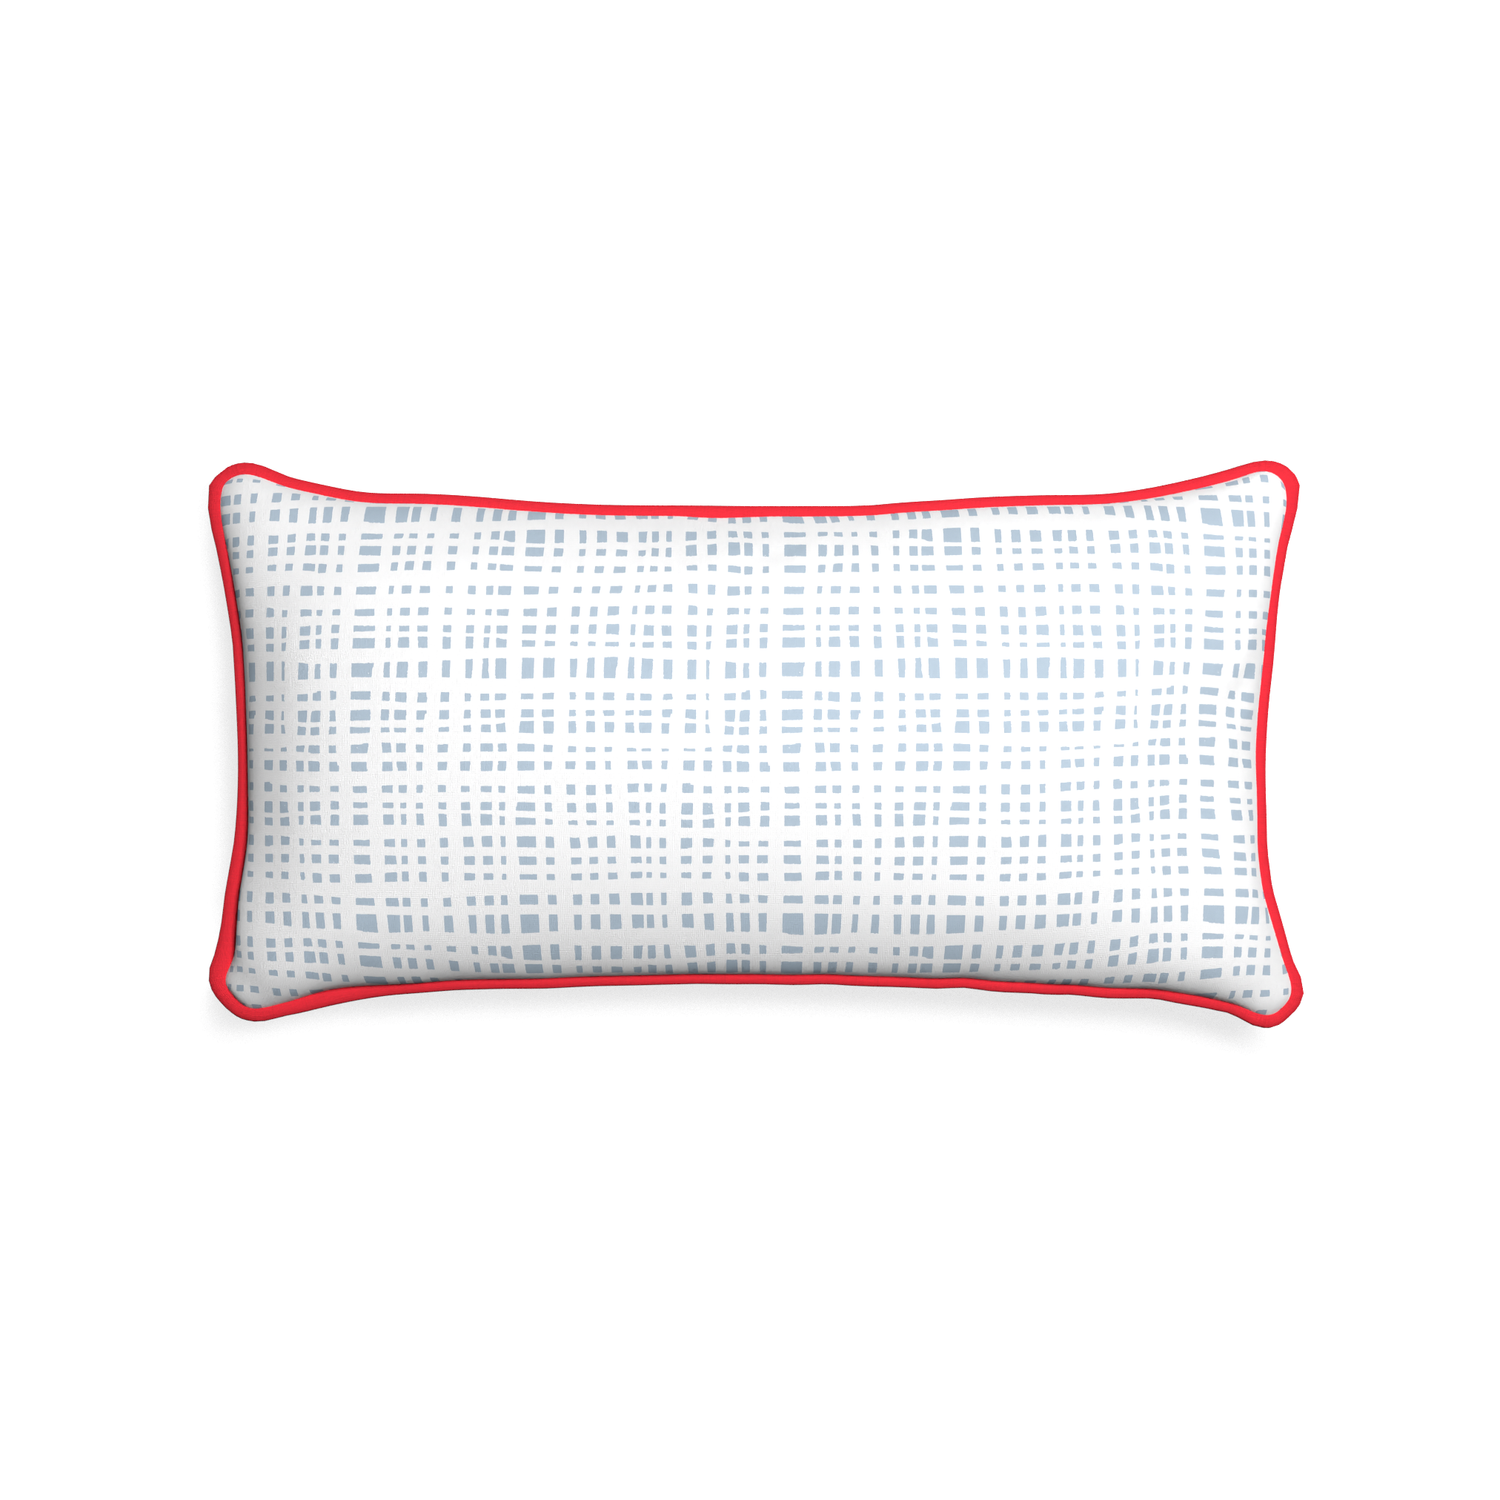 Midi-lumbar ginger sky custom plaid sky bluepillow with cherry piping on white background